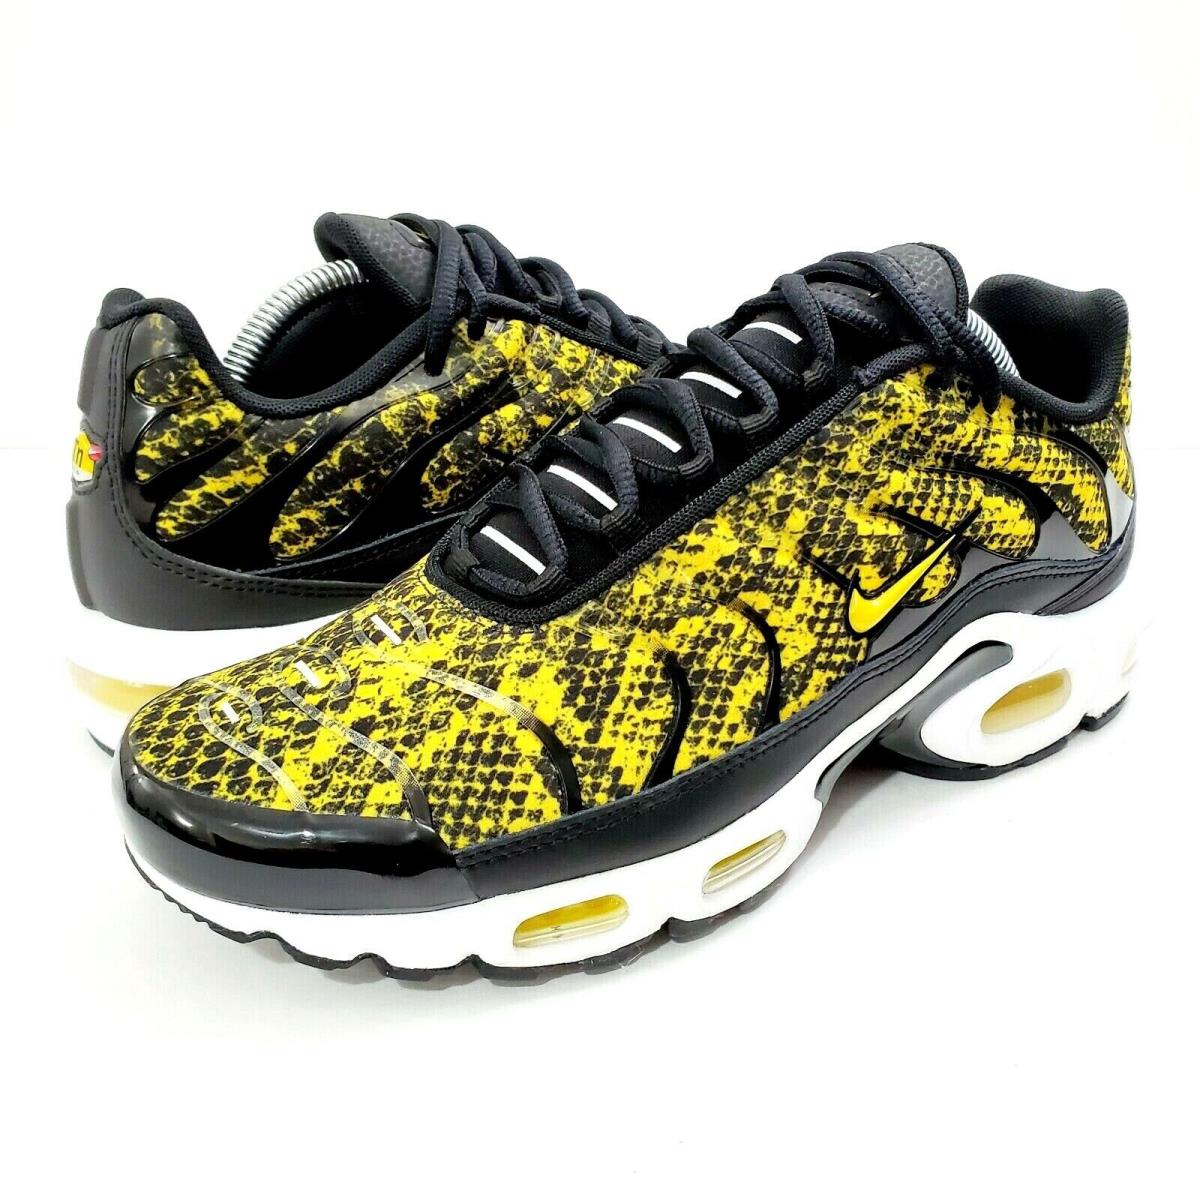 Nike Shoes Air Max Plus Womens Size 10 Yellow Snakeskin Sneaker CT1555-001